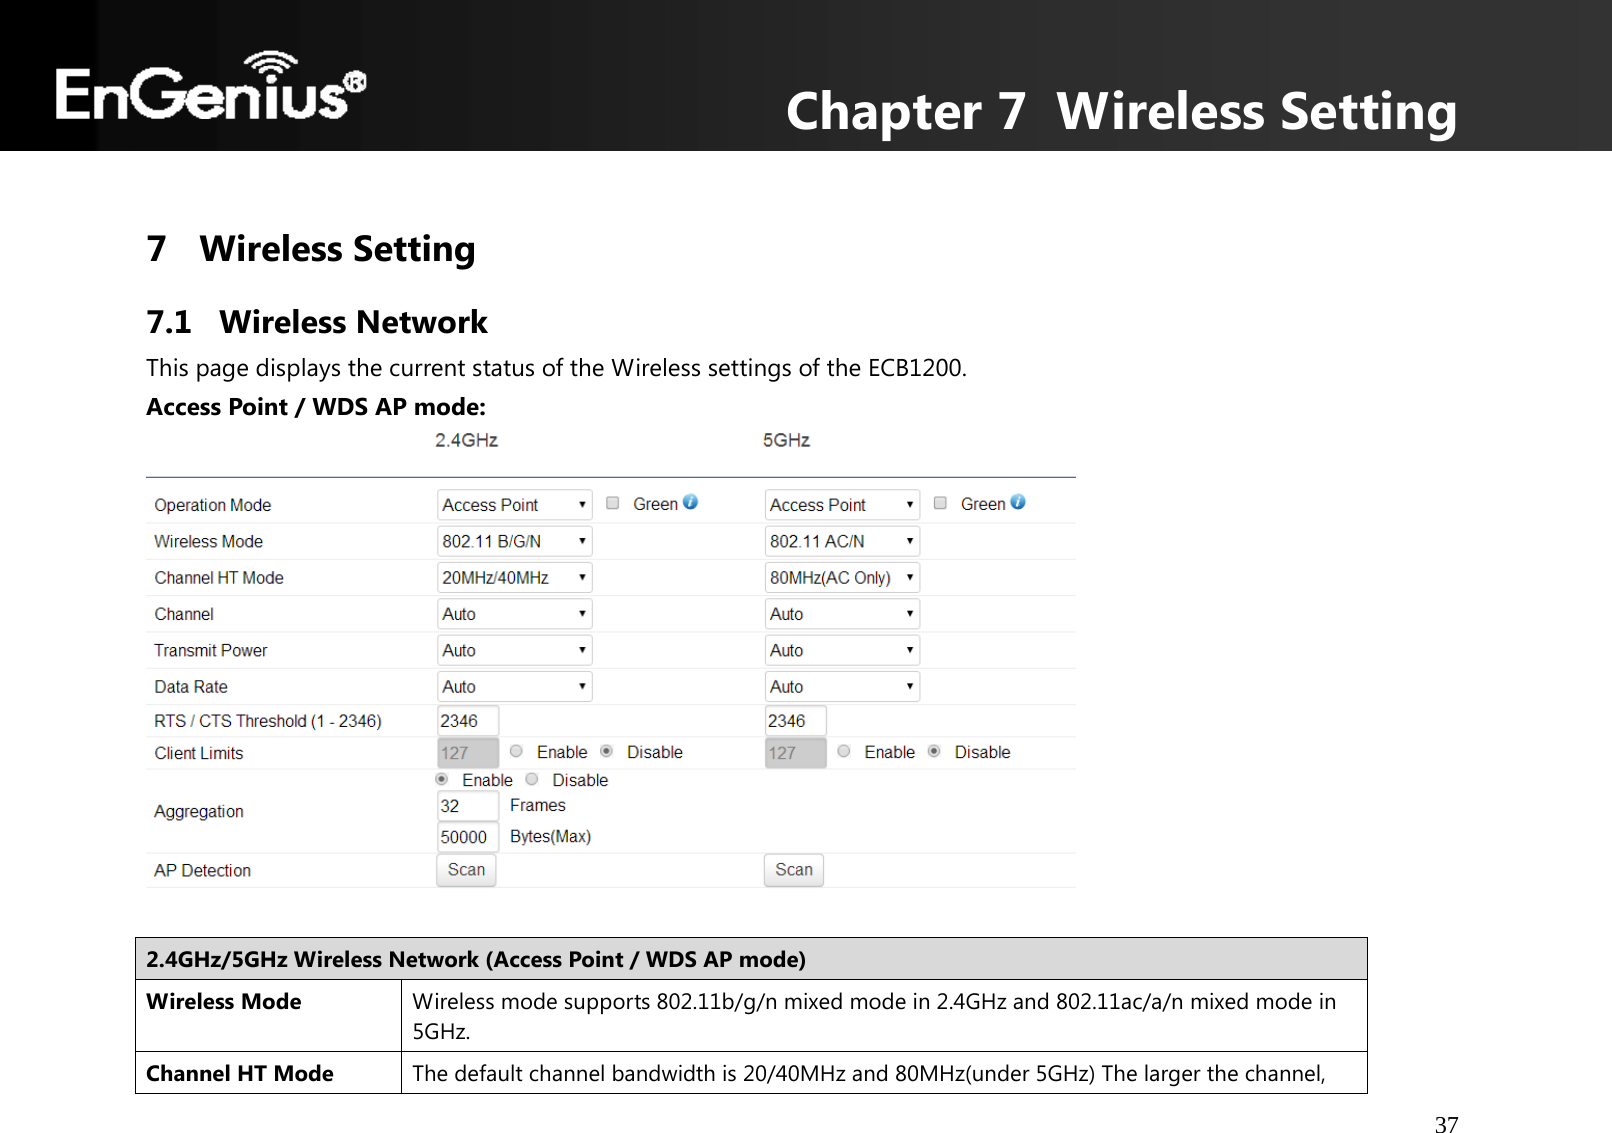 Chapter 7  Wireless Setting 37   7 Wireless Setting 7.1 Wireless Network This page displays the current status of the Wireless settings of the ECB1200. Access Point / WDS AP mode:    2.4GHz/5GHz Wireless Network (Access Point/WDS AP mode)Wireless Mode  Wireless mode supports 802.11b/g/n mixed mode in 2.4GHz and 802.11ac/a/n mixed mode in 5GHz. Channel HT Mode  The default channel bandwidth is 20/40MHz and 80MHz(under 5GHz) The larger the channel, 